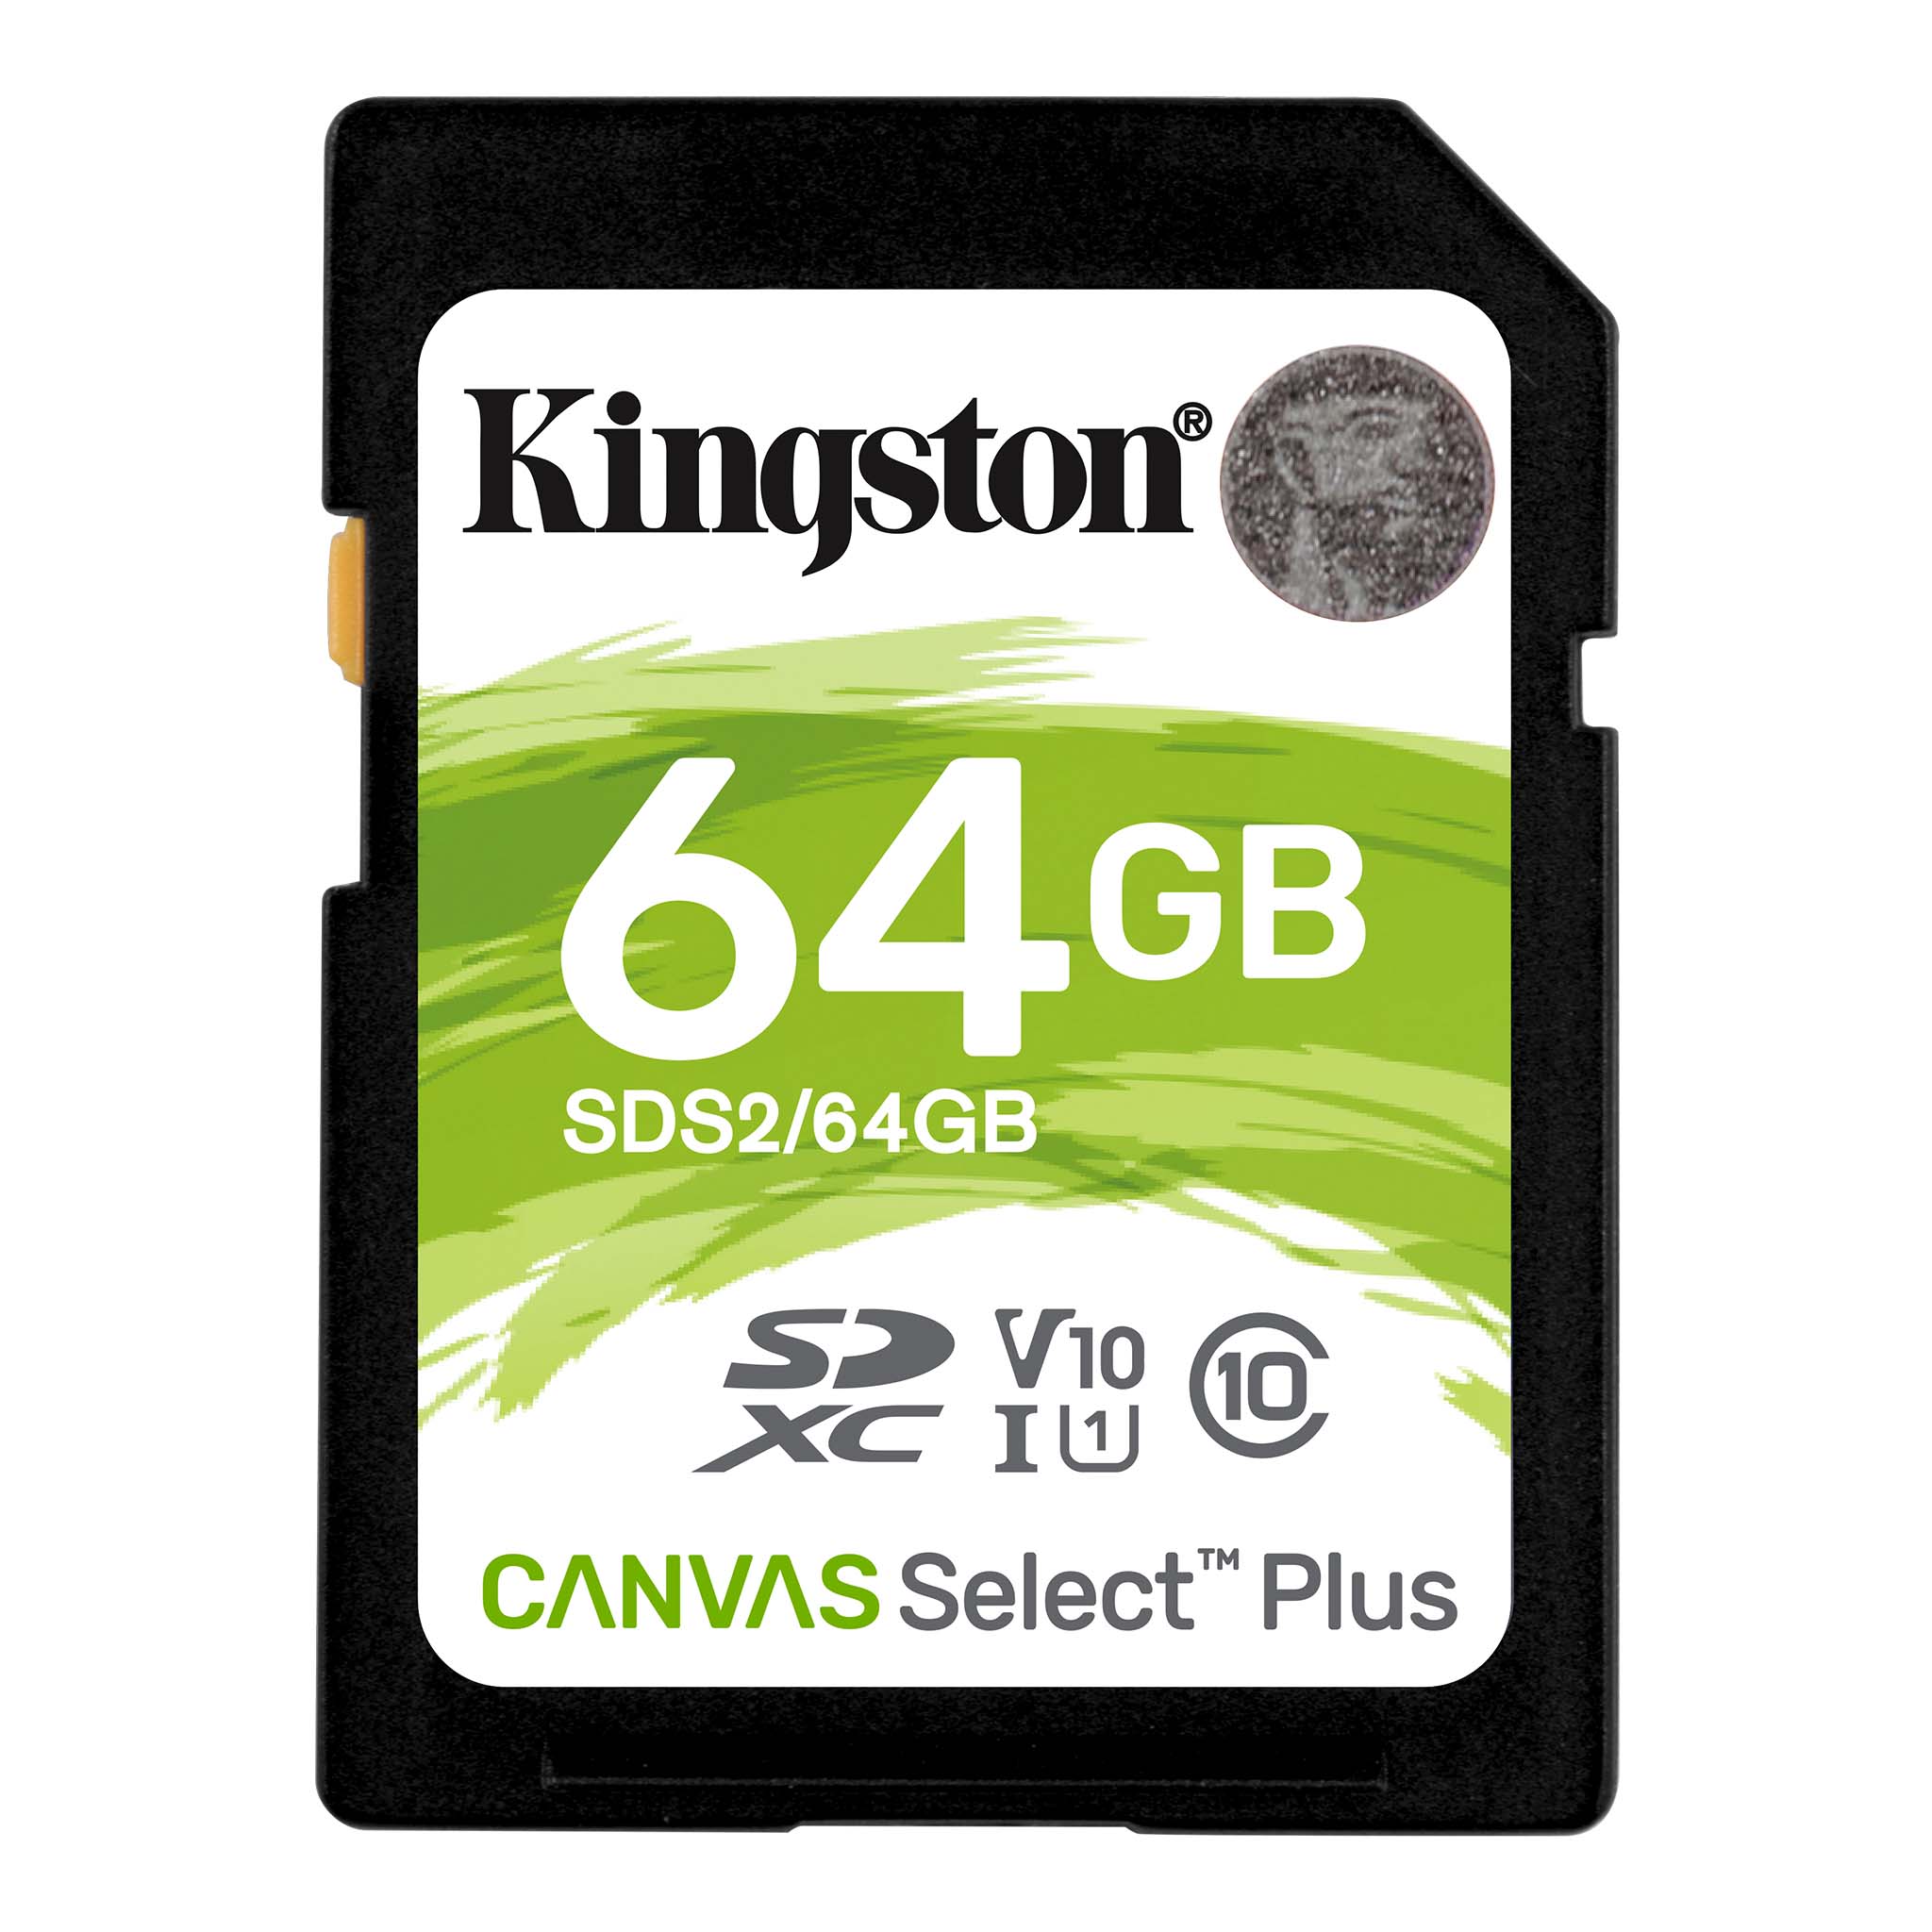 100MBs Works with Kingston Kingston 64GB LG H220 MicroSDXC Canvas Select Plus Card Verified by SanFlash. 